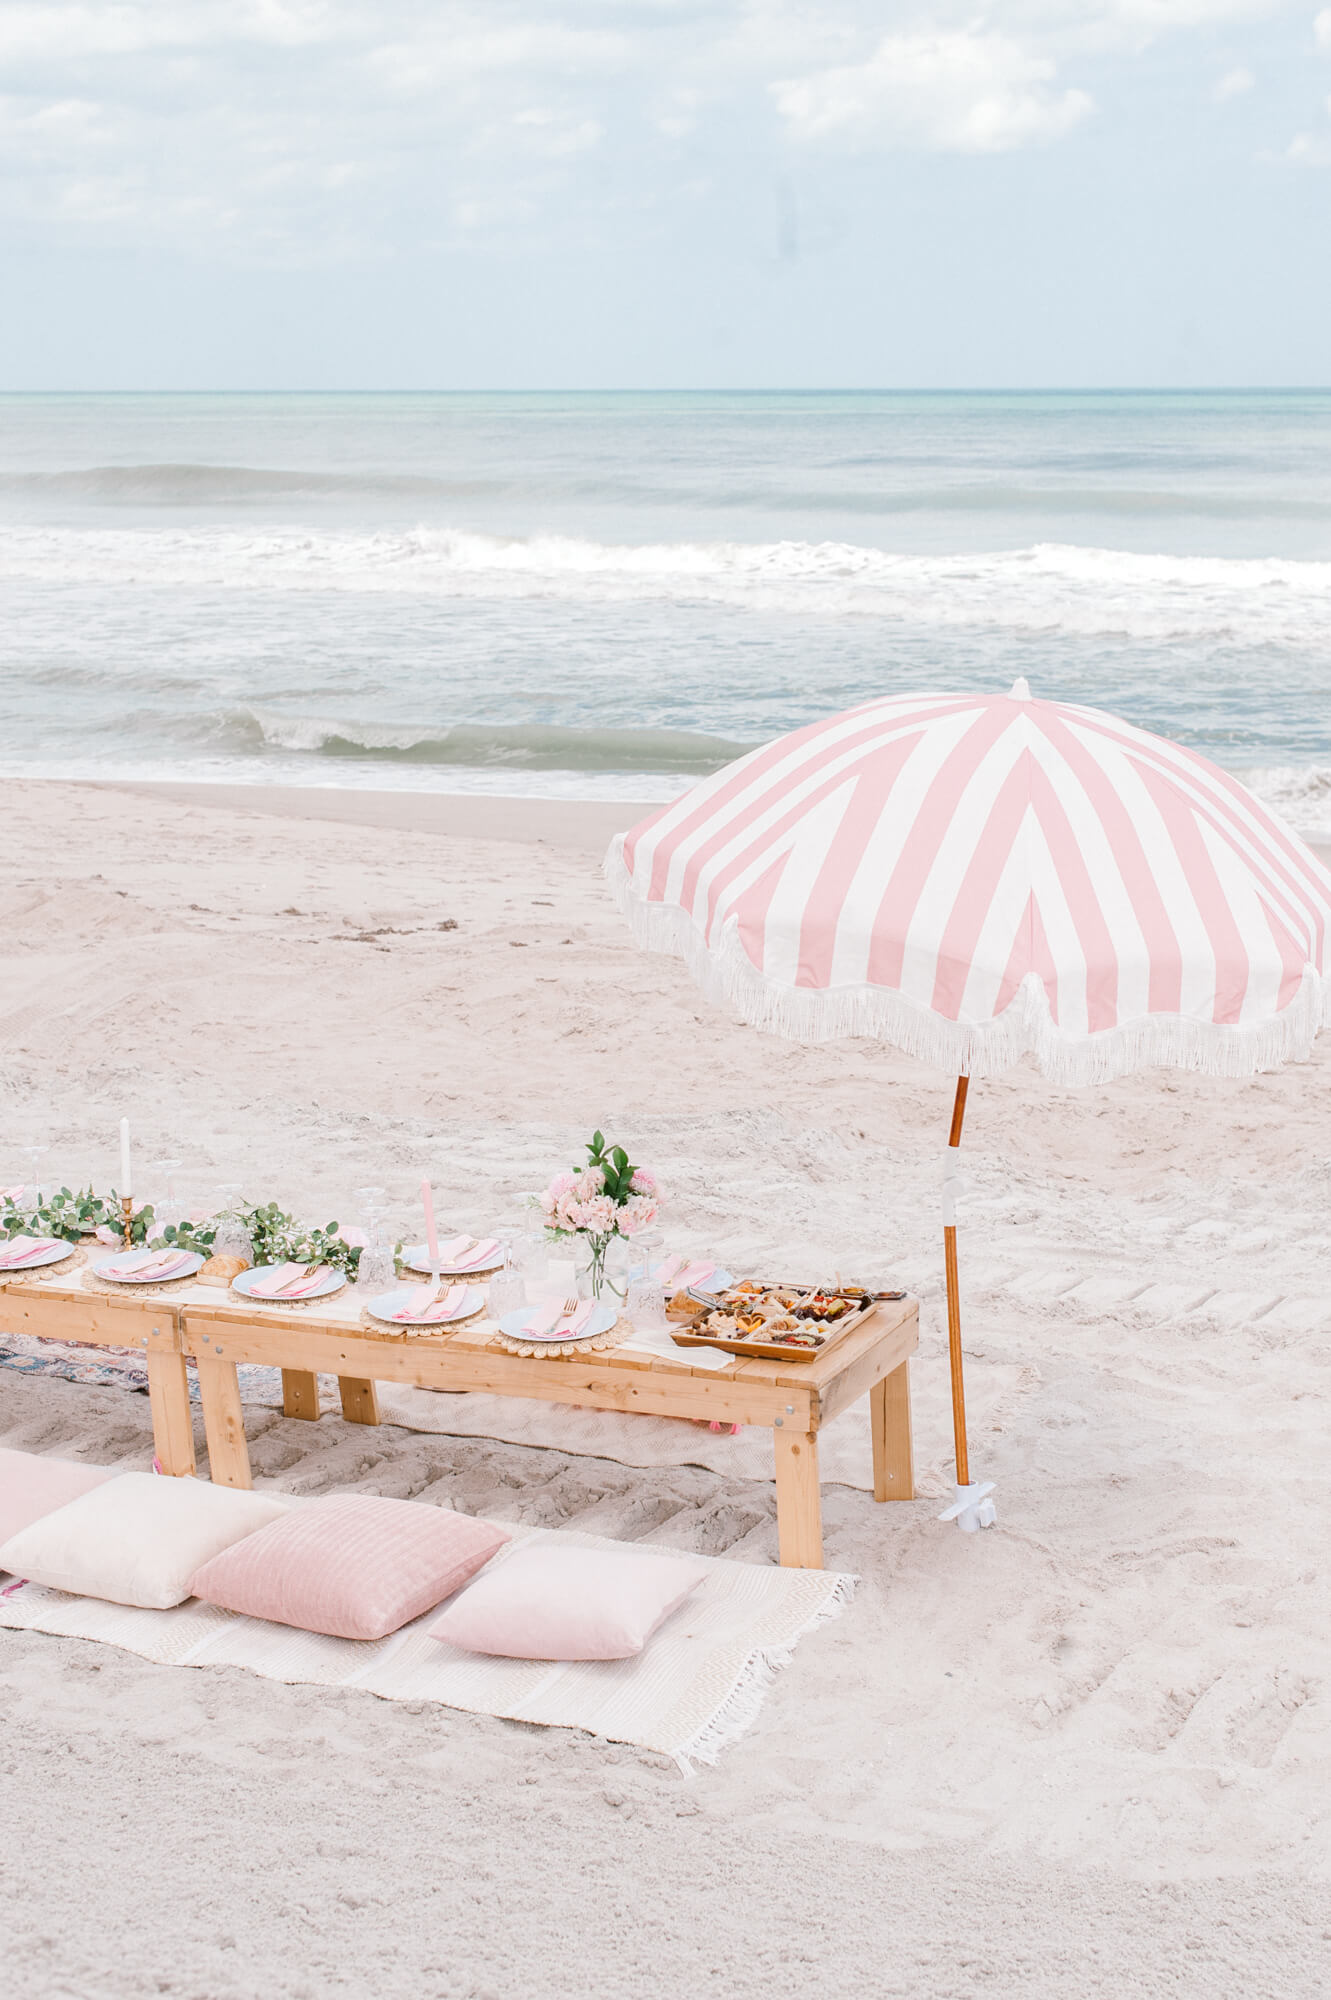 The cutest aesthetically beautiful picnic set up from A Picnic Affairs luxury picnic company.